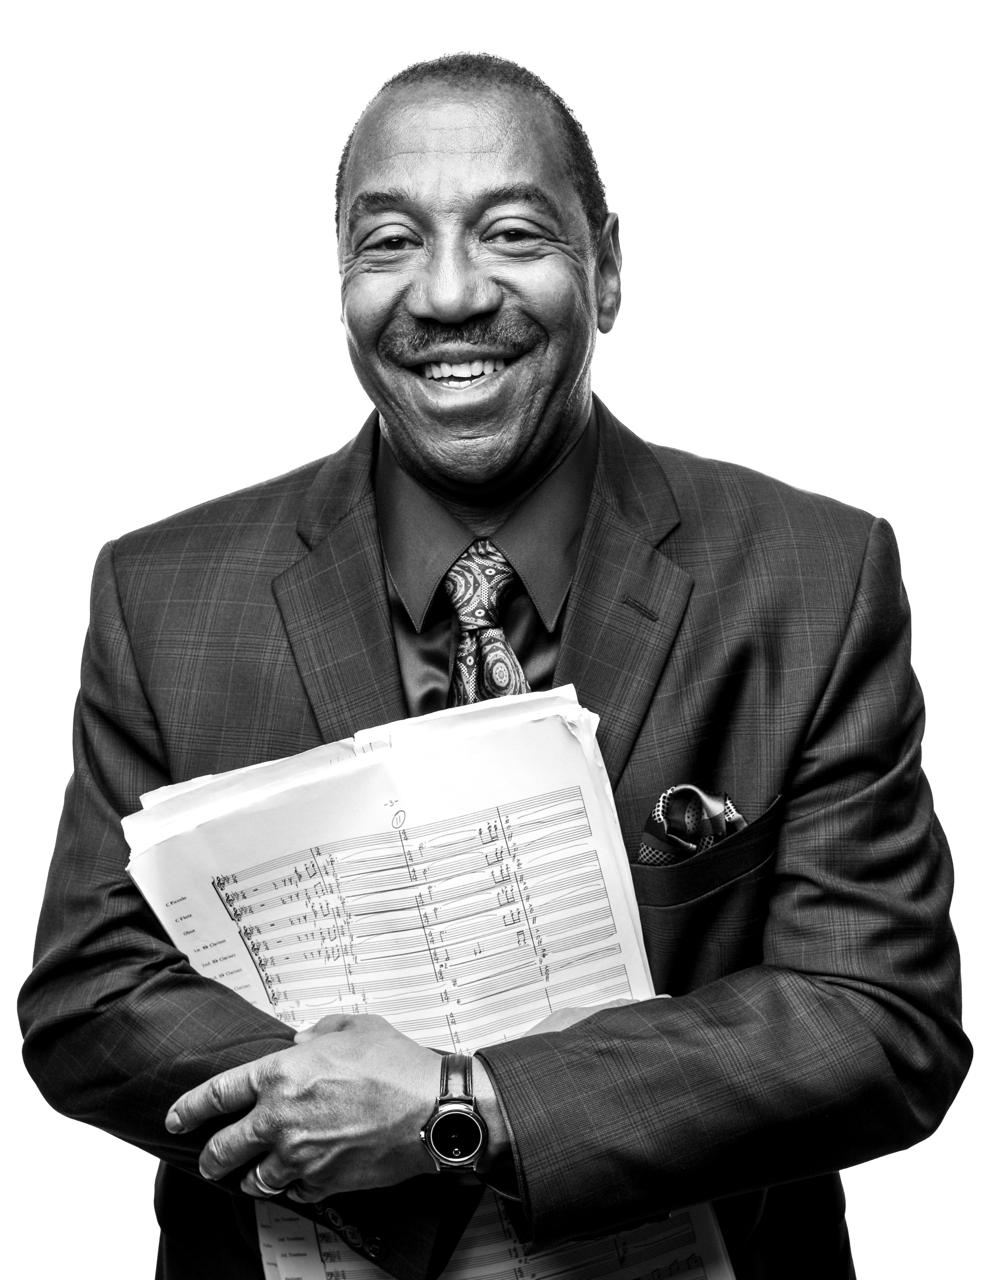 About the composer - Quincy C. Hilliard s compositions for wind band are published by published by a variety of well known publishers.